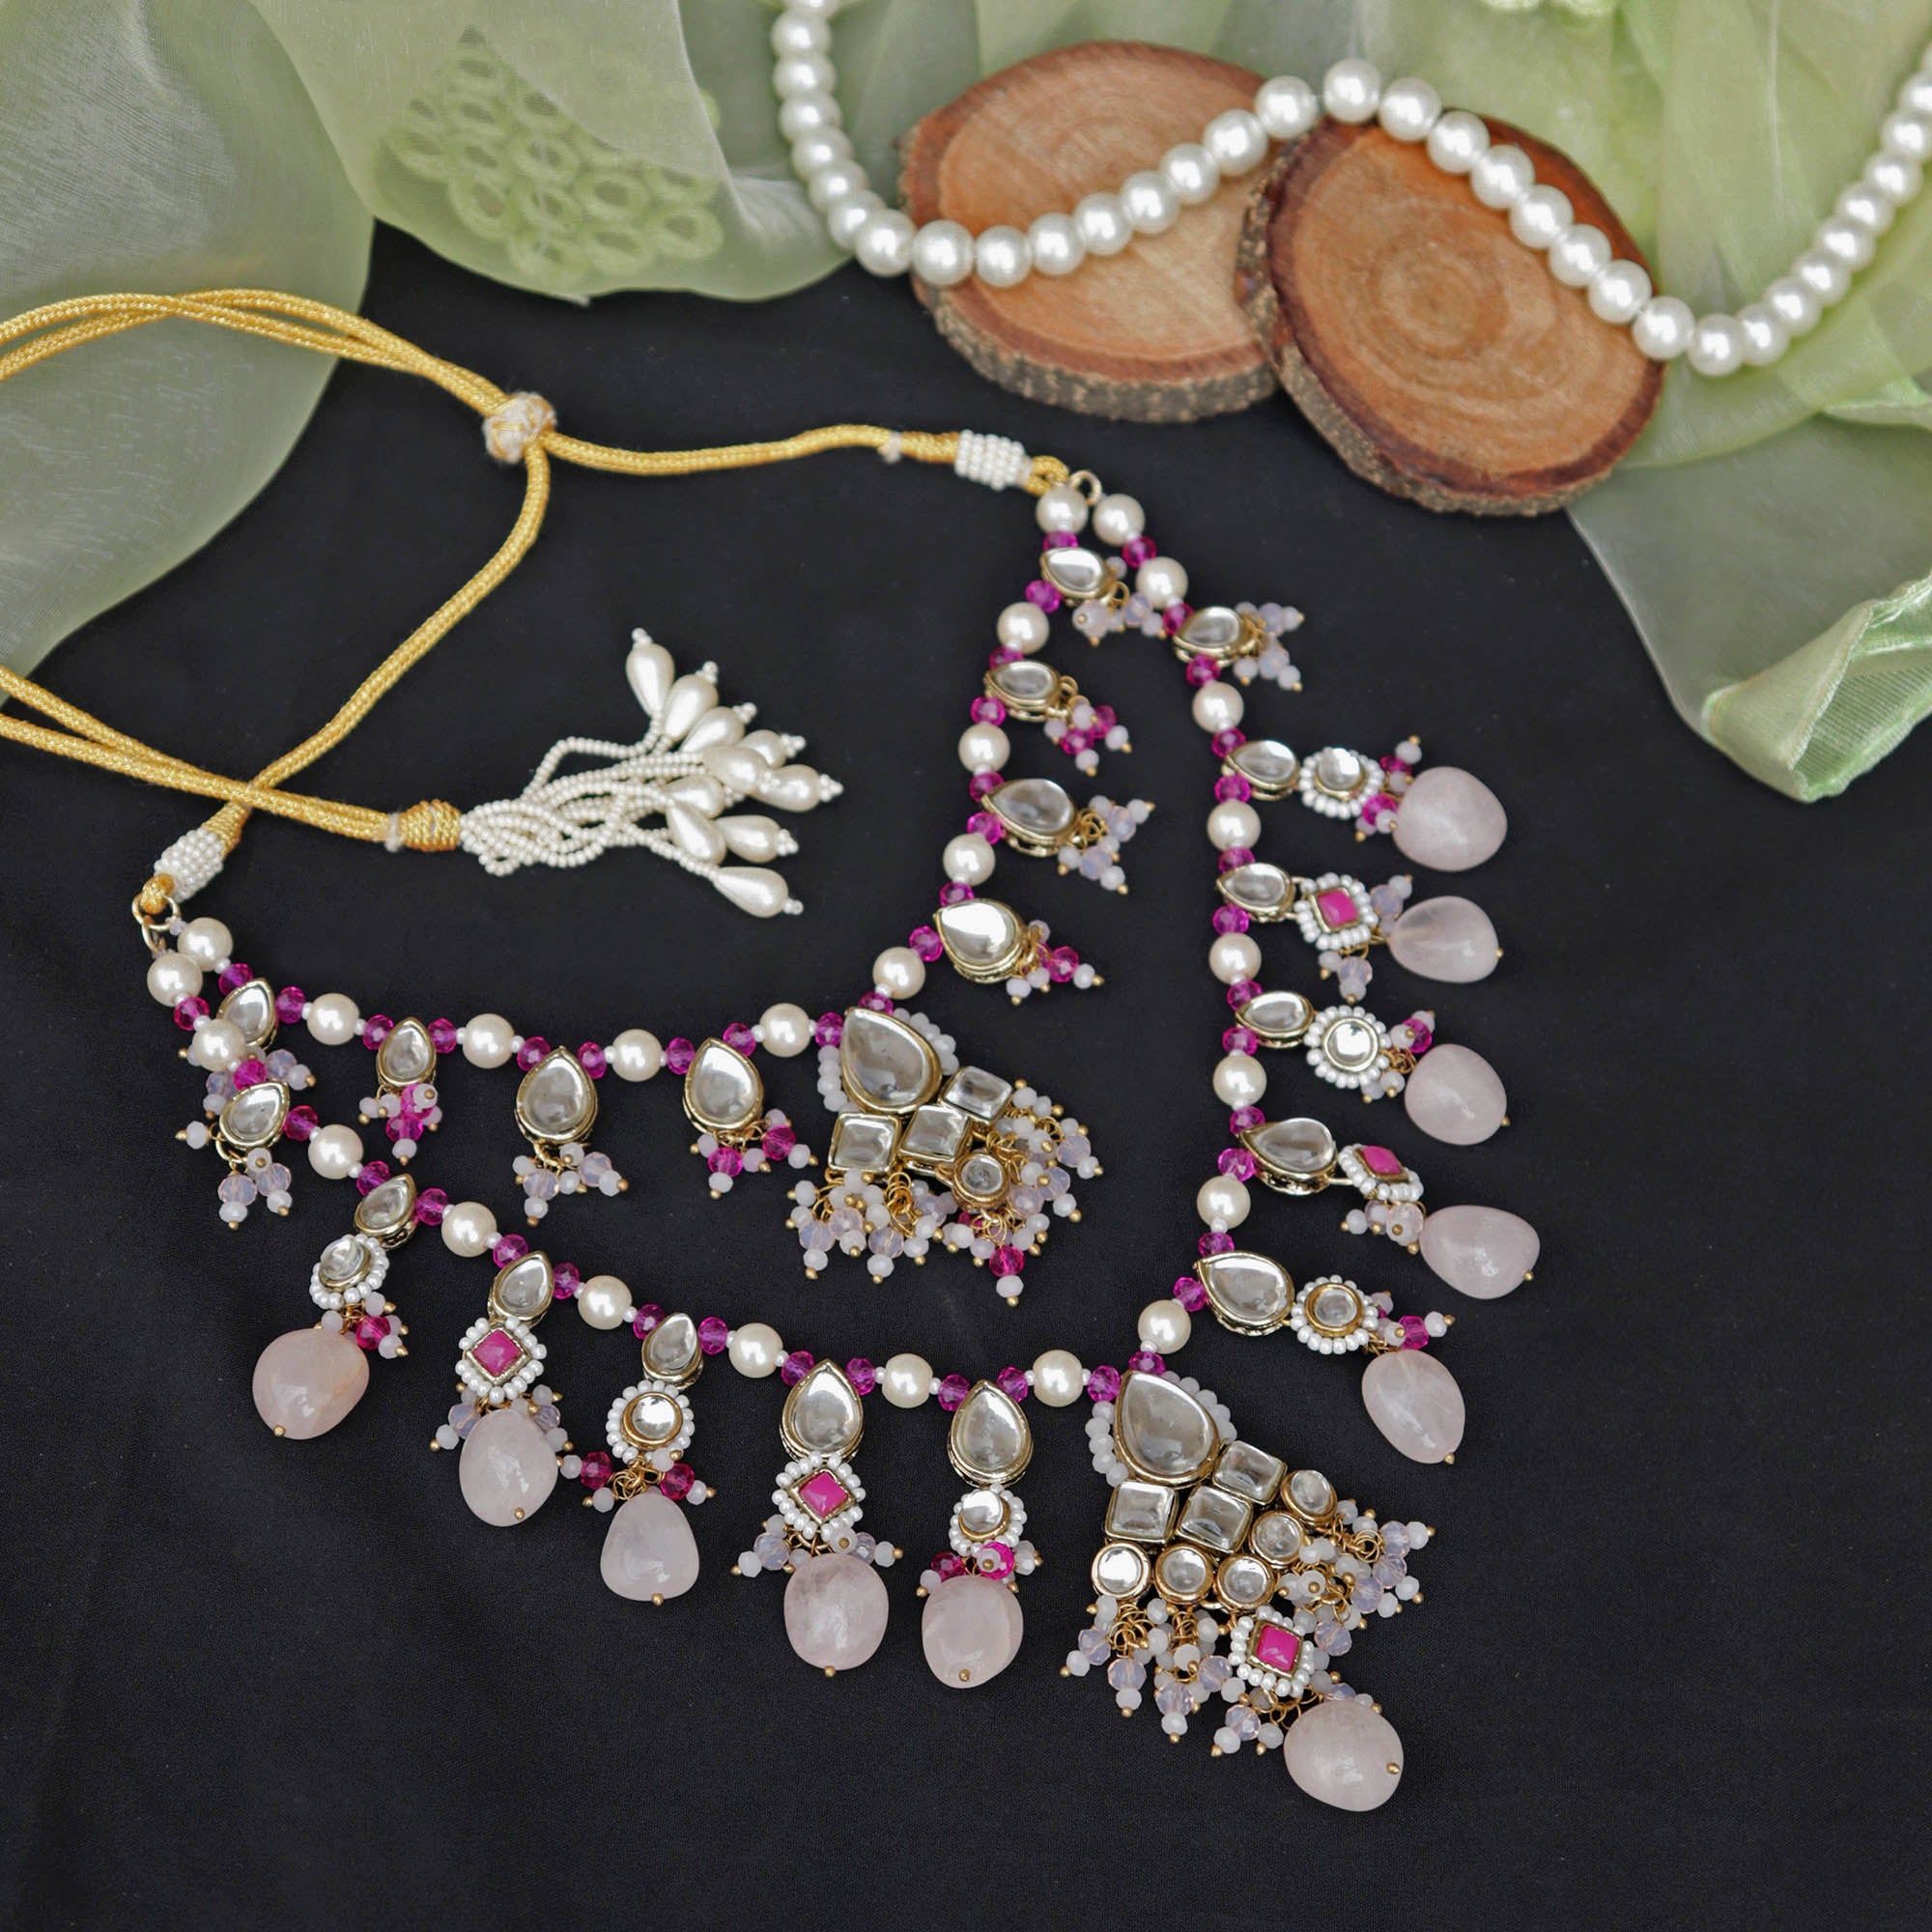 Beabhika Handmade Artificial Jewelry Pink Color Stones Kundan Necklace Gold Tone Kundan Choker Neckalce Set With Matching Earrings Kundan Jewelry Set Rose Quartz Stones Necklace With Same Style Earrings Available On COD In India Delhi Express Shipping Jewelry Heavy Necklace Set For Indian Party Ethnic Dress Matching Heavy Work Gold Plated Necklace Traditional Heeramandi Style Jewelry